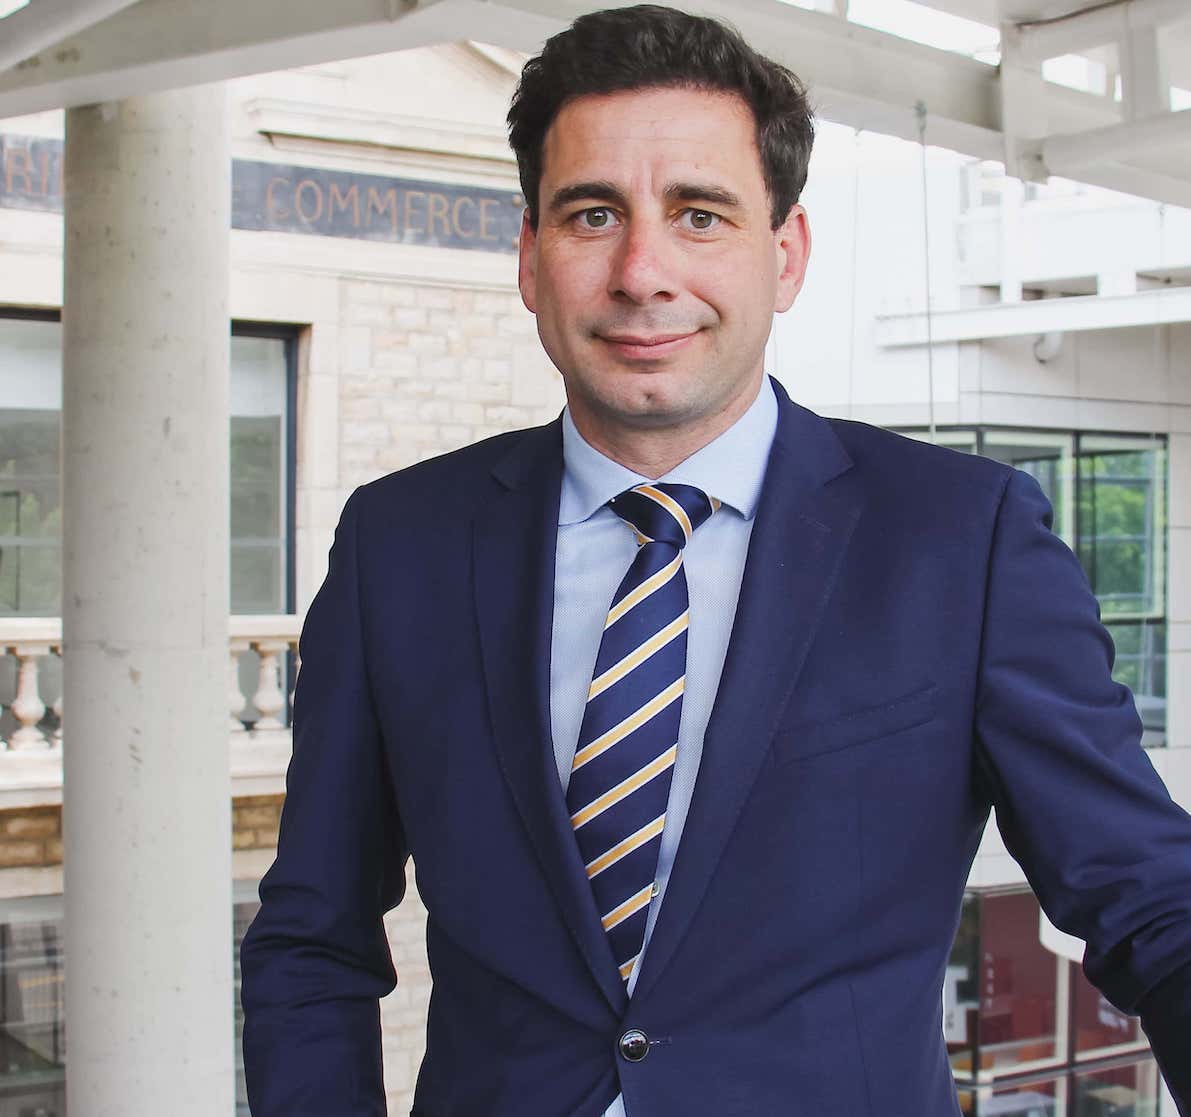 Edouard Mognetti has been appointed director of the School of Wine & Spirits Business at the Burgundy School of Business. He succeeds Jérôme Gallo, who has headed the alcoholic beverage industry management school since its inception in 2013 ow.ly/QfU250RTNaA